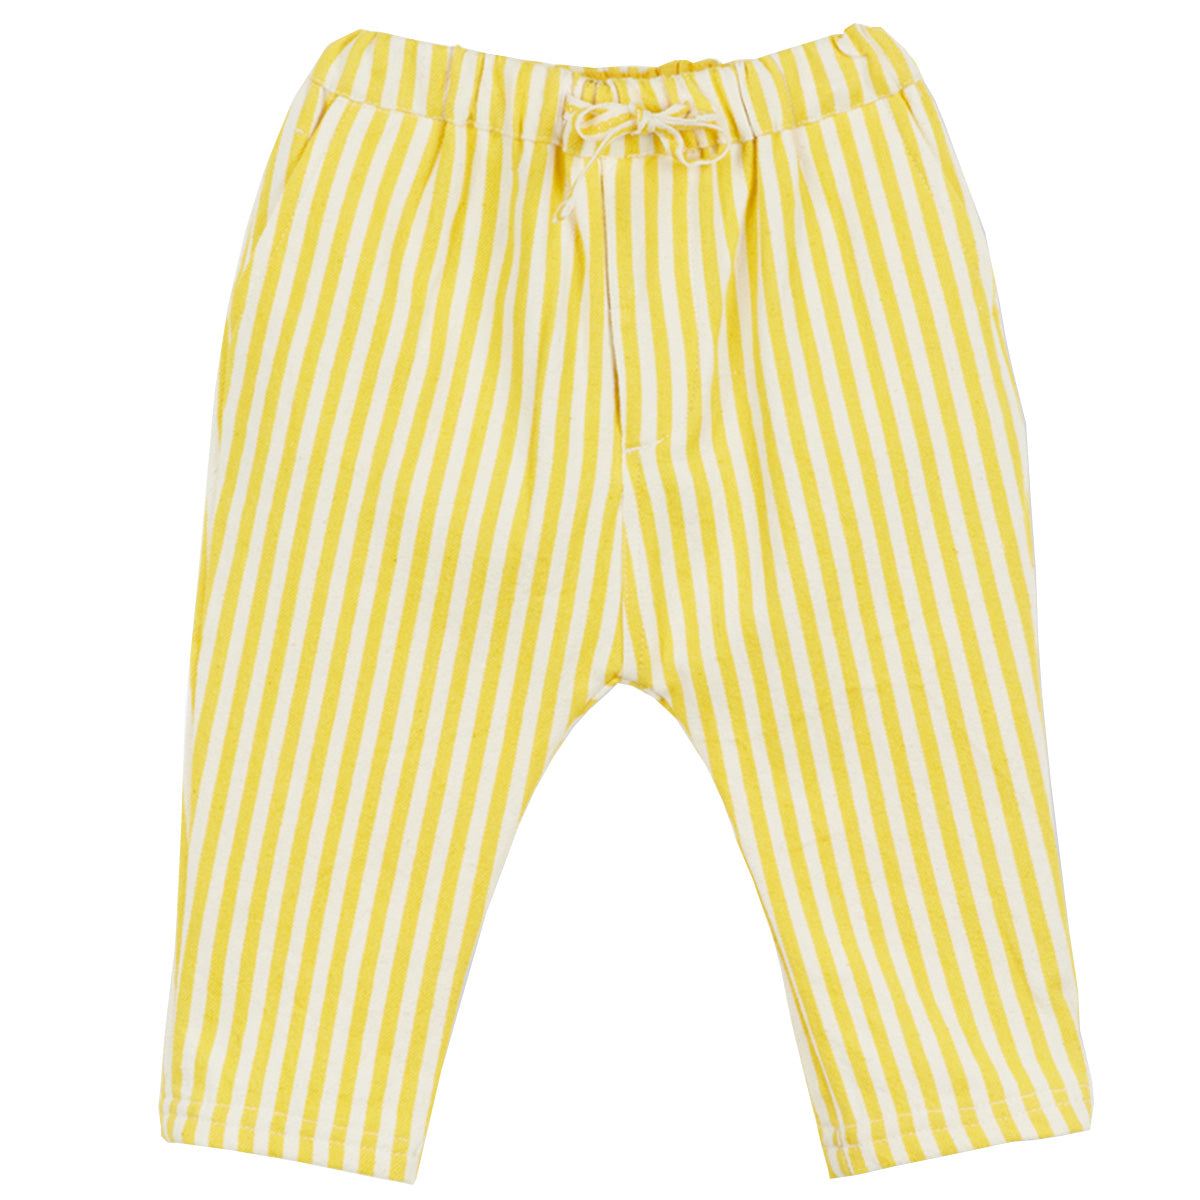 The Denim Scratches Pants from Arsene et Les Pipelettes. Baby pants in striped denim. Elastic size with tightening cord